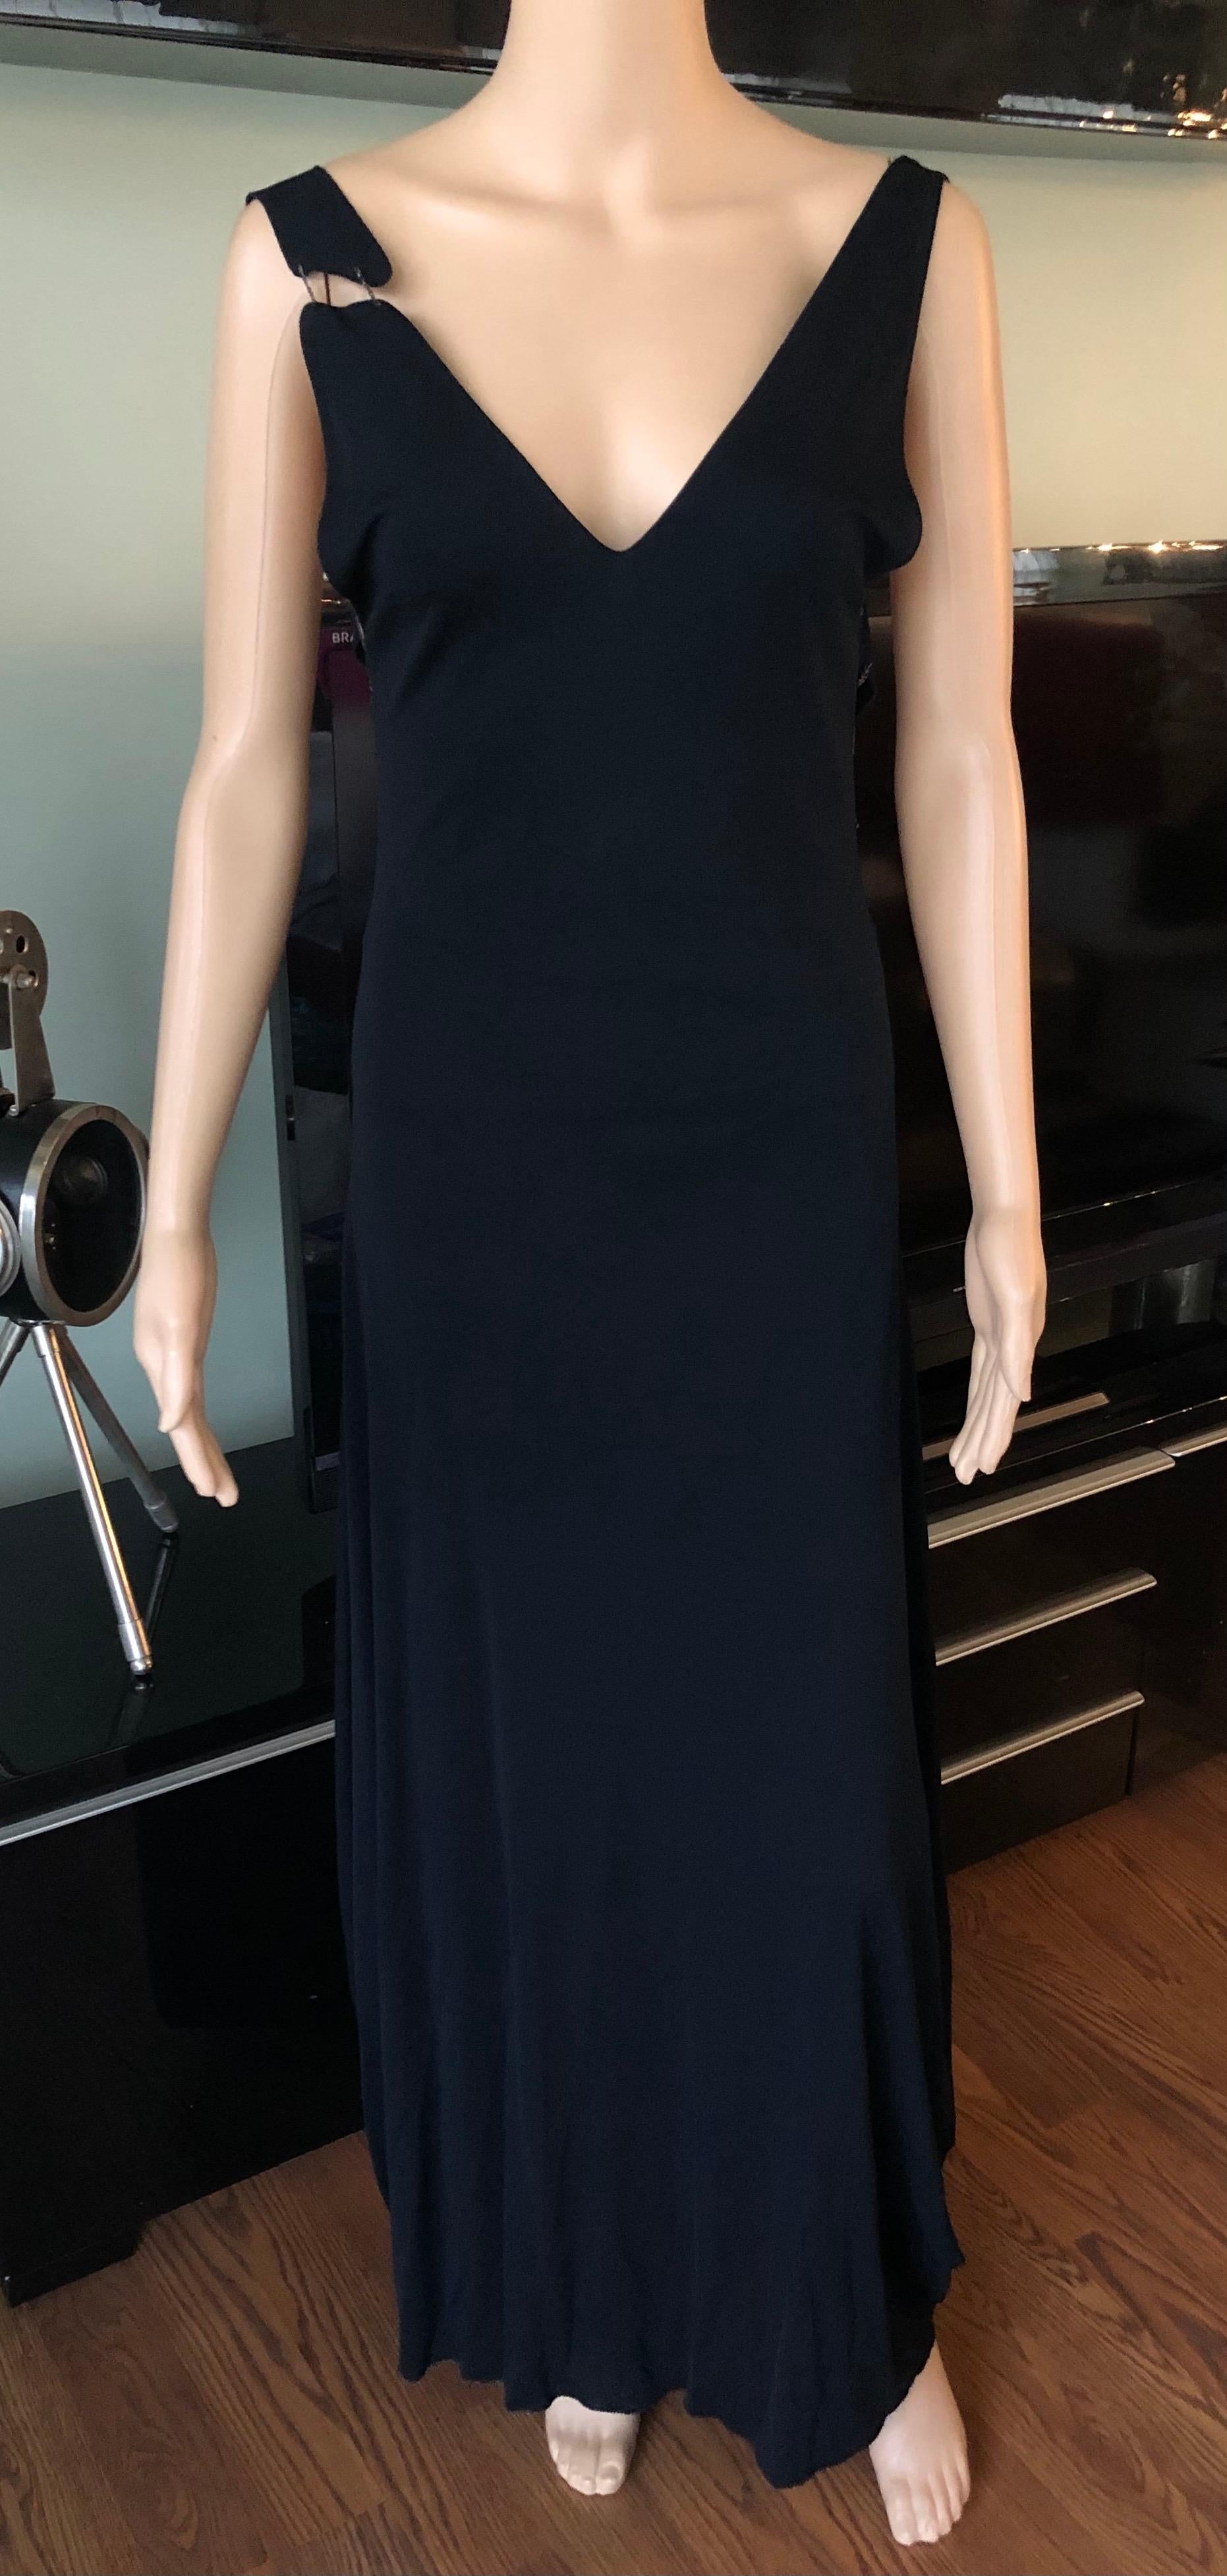 Jean Paul Gaultier S/S 2003 Chain Embellished Open Back Black Evening Dress Gown In Good Condition For Sale In Naples, FL